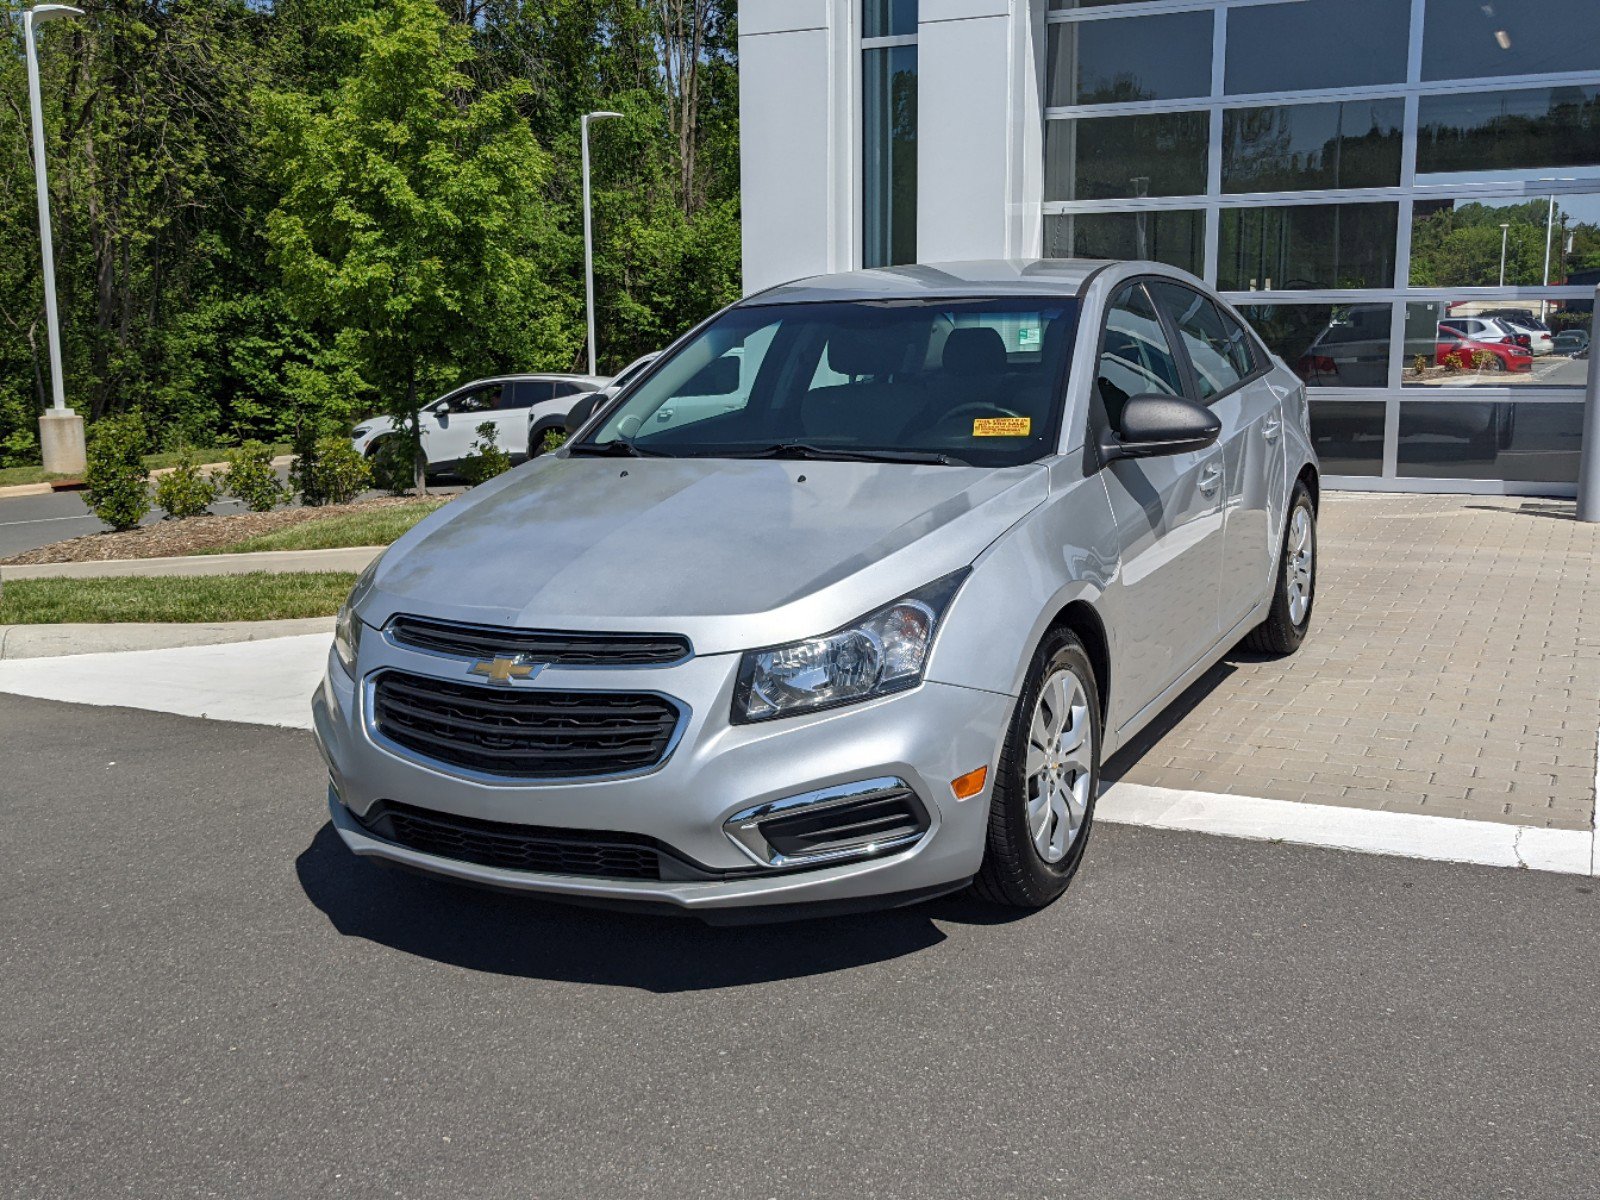 Pre-Owned 2016 Chevrolet Cruze Limited LS 4dr Car in Smithfield #1971C |  Classic Ford of Smithfield